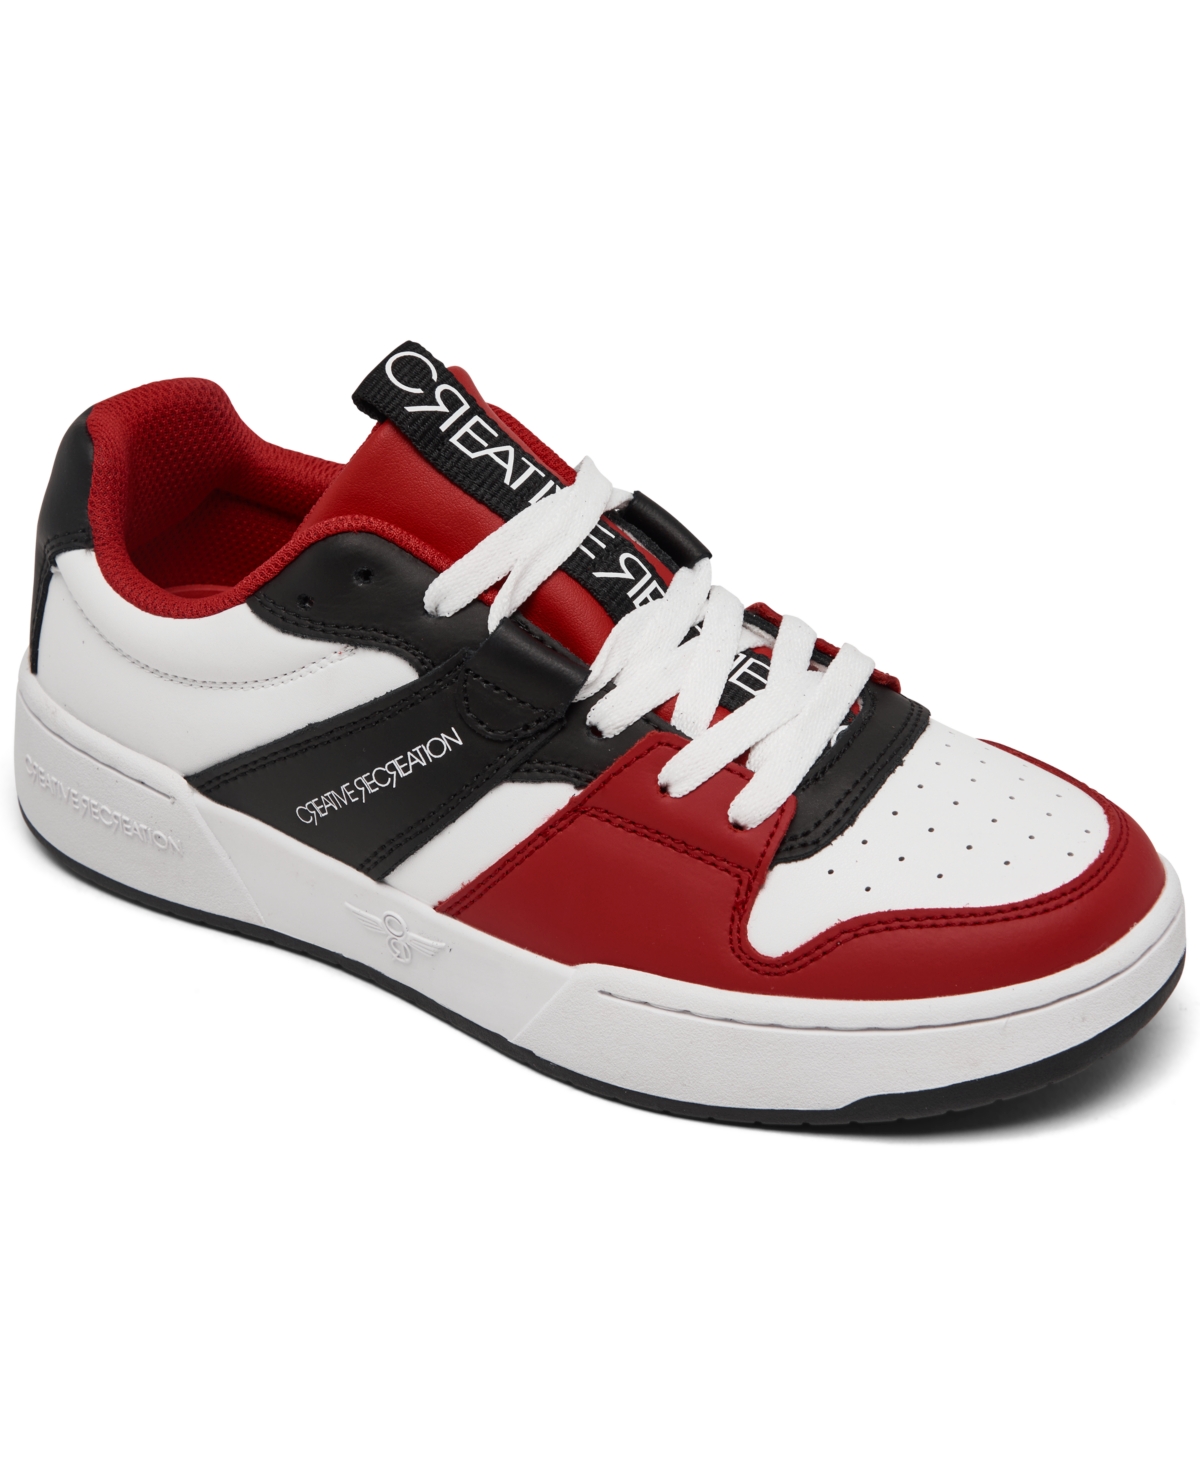 Women's Janae Low Casual Sneakers from Finish Line - White, Black, Red